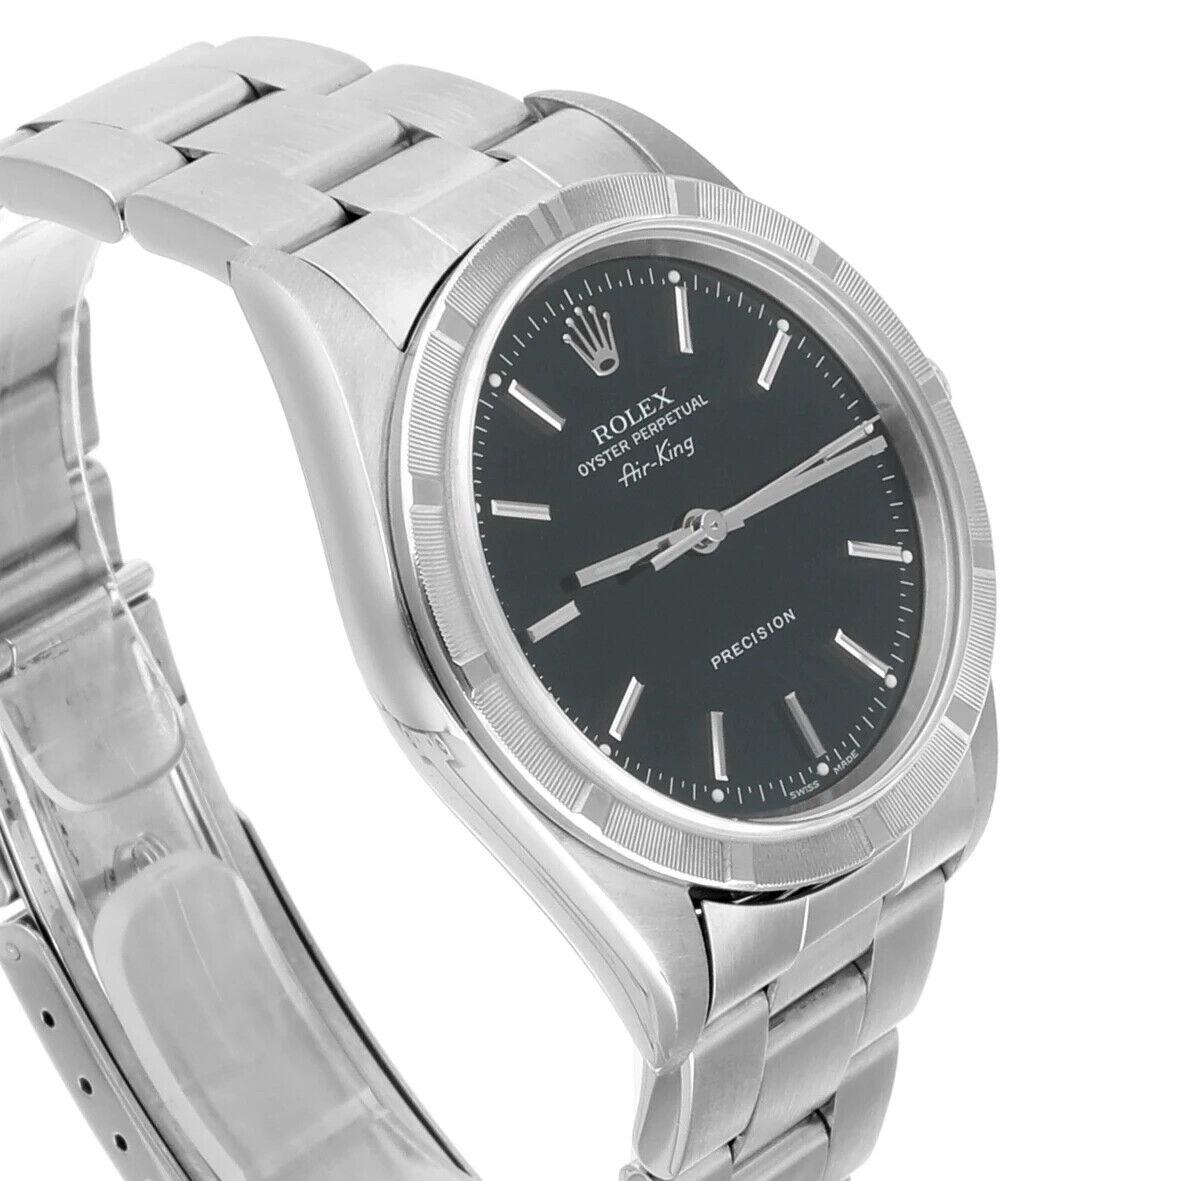 Montre Rolex Oyster Perpetual Air-King 34mm Black Stainless Steel Oyster 14010 en vente 1